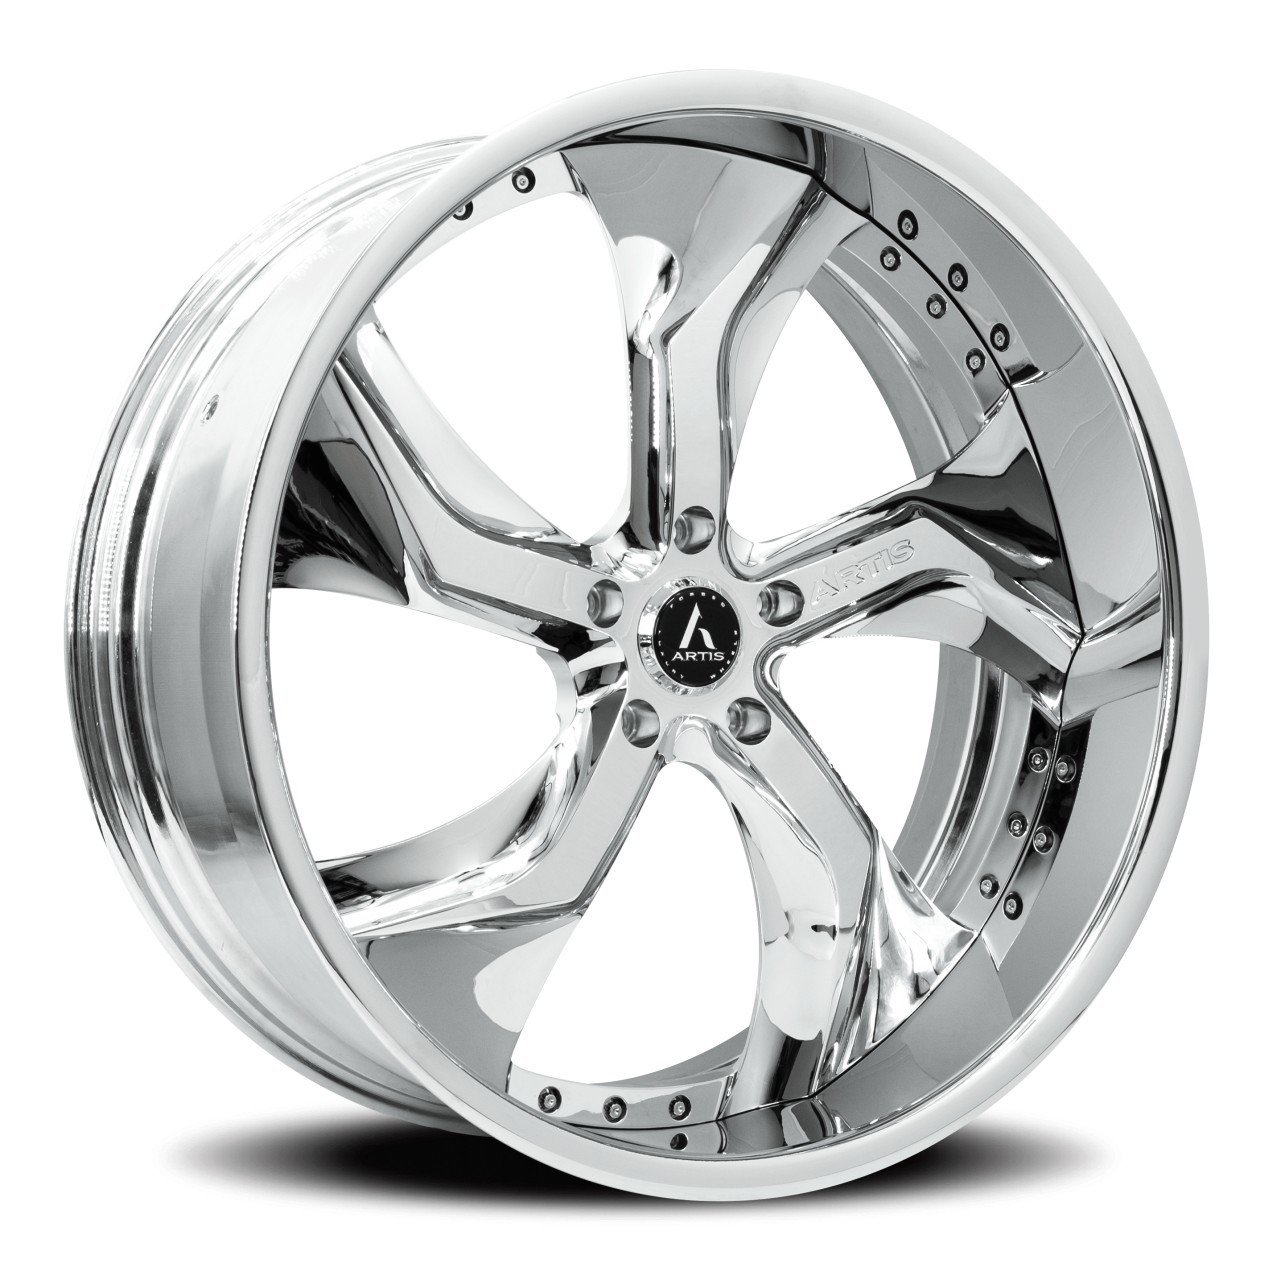 Artis Bully forged wheels